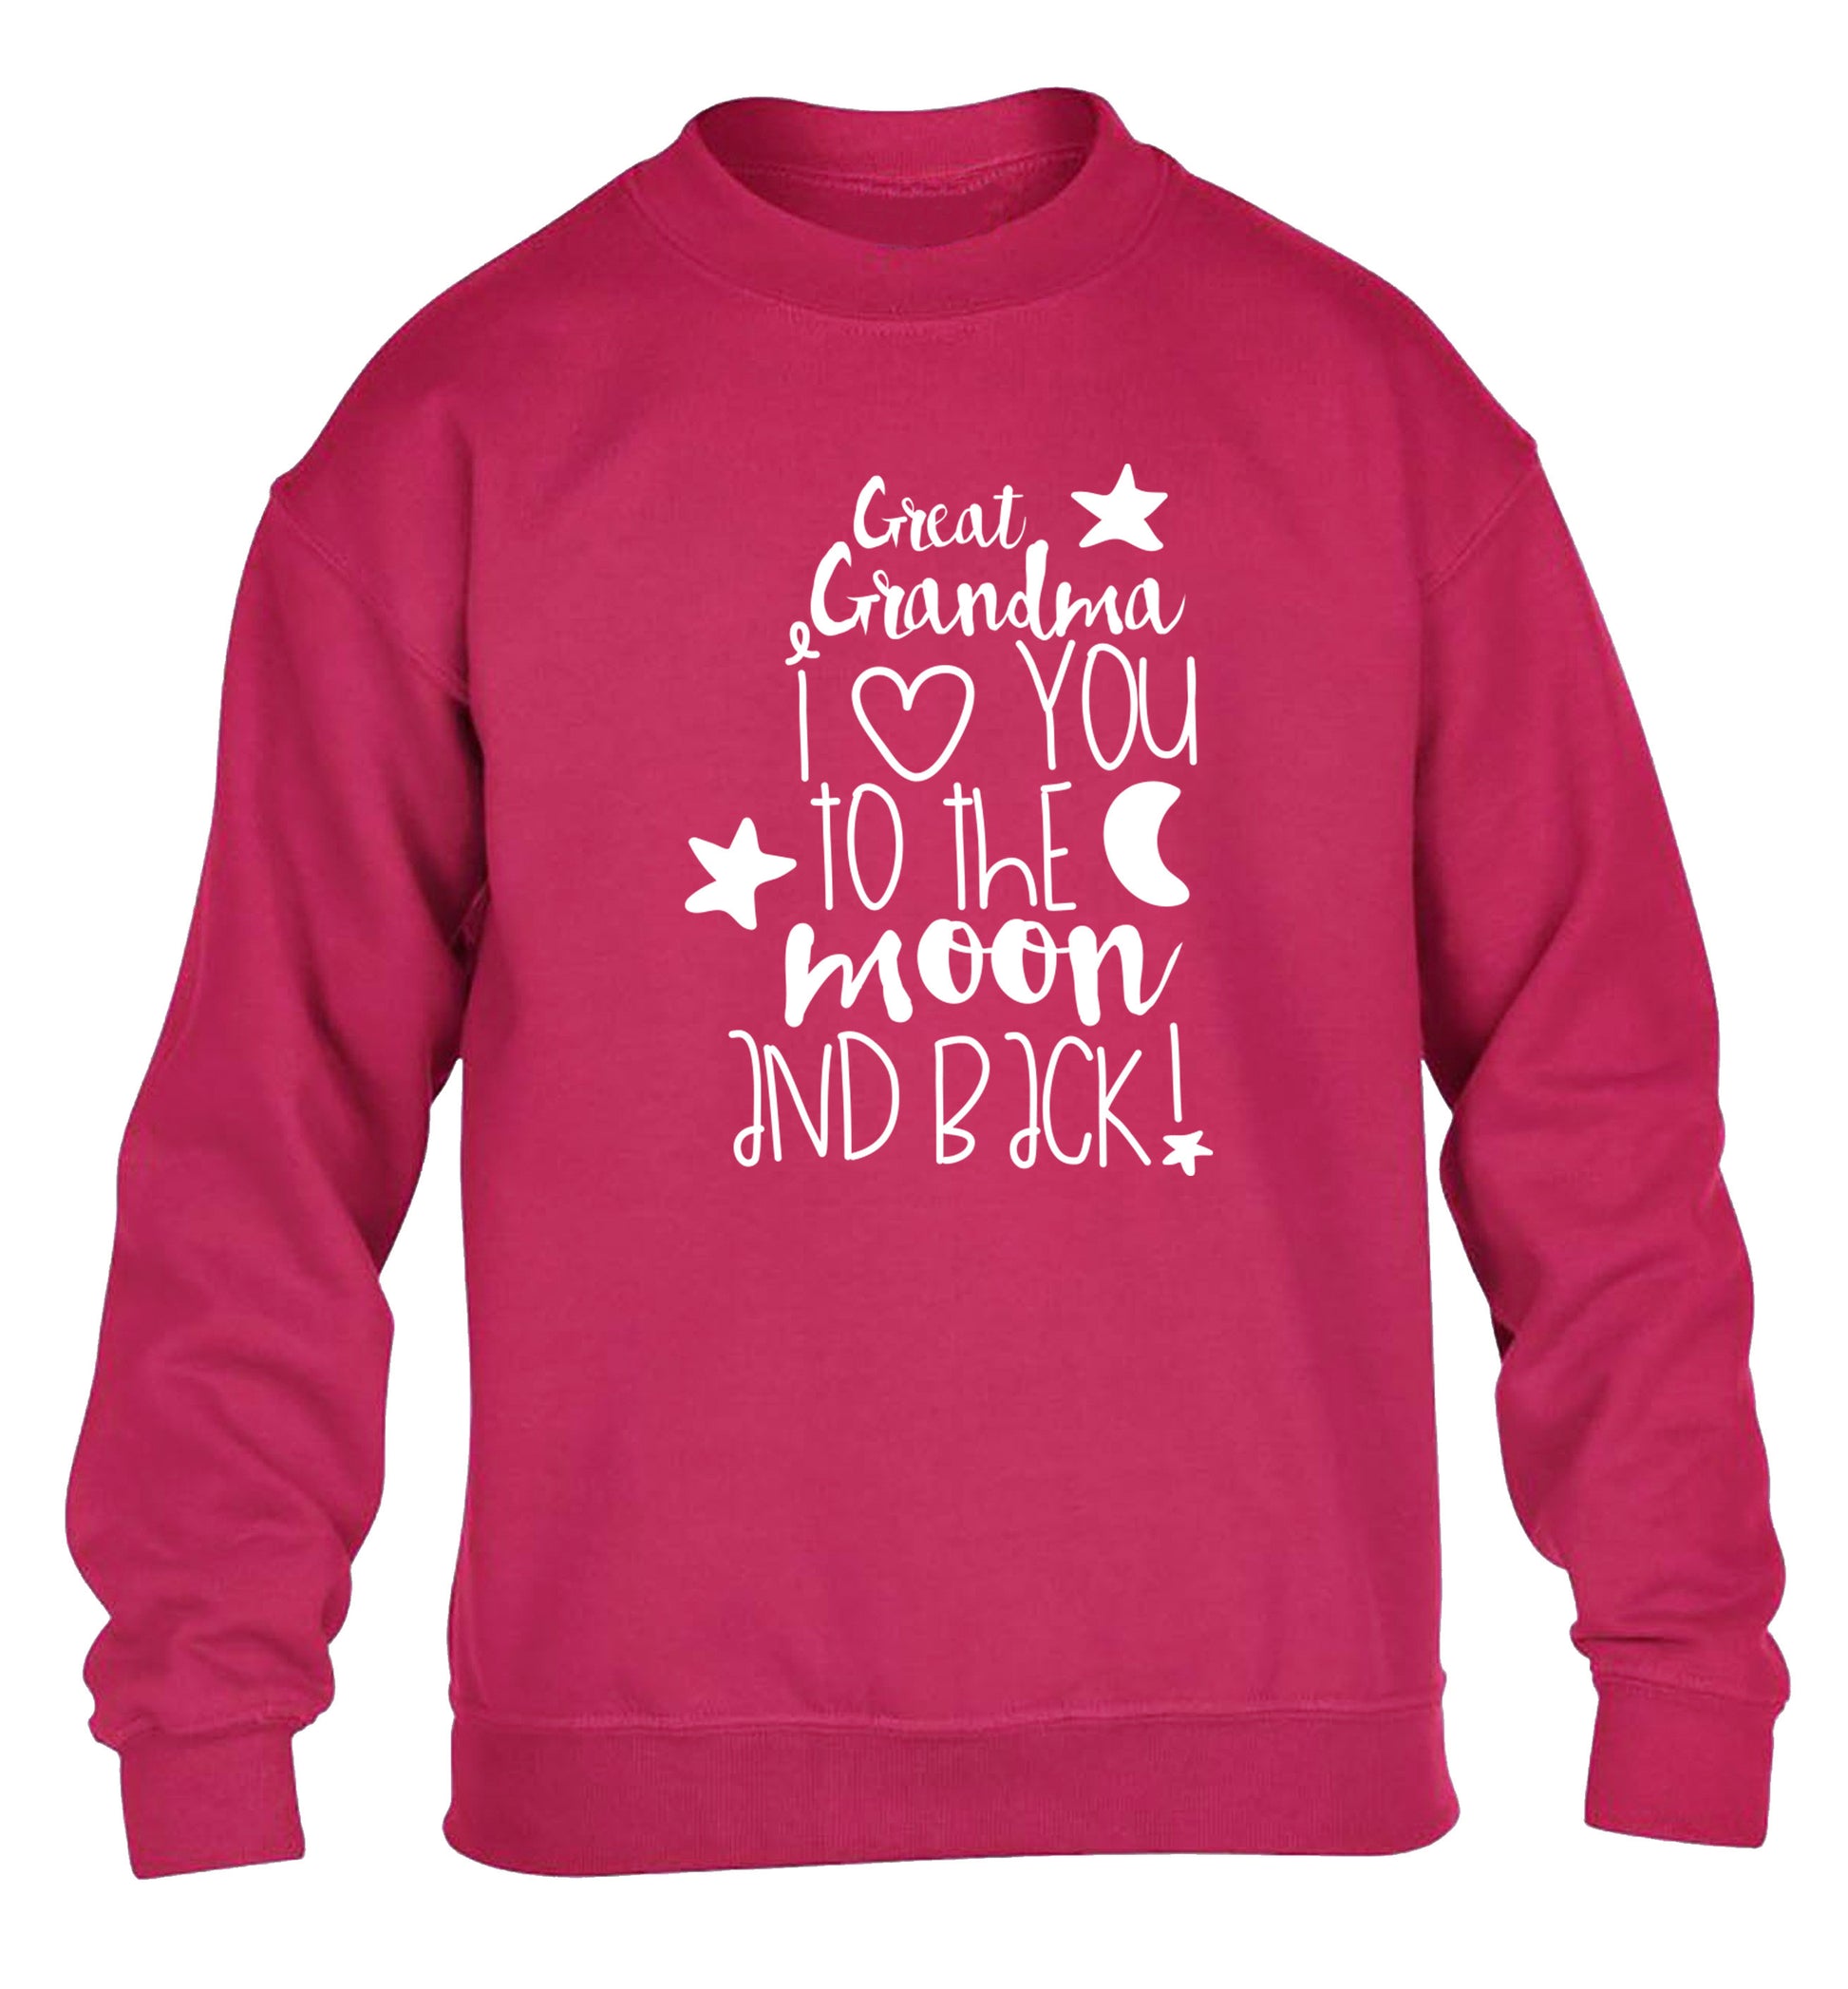 Great Grandma I love you to the moon and back children's pink  sweater 12-14 Years